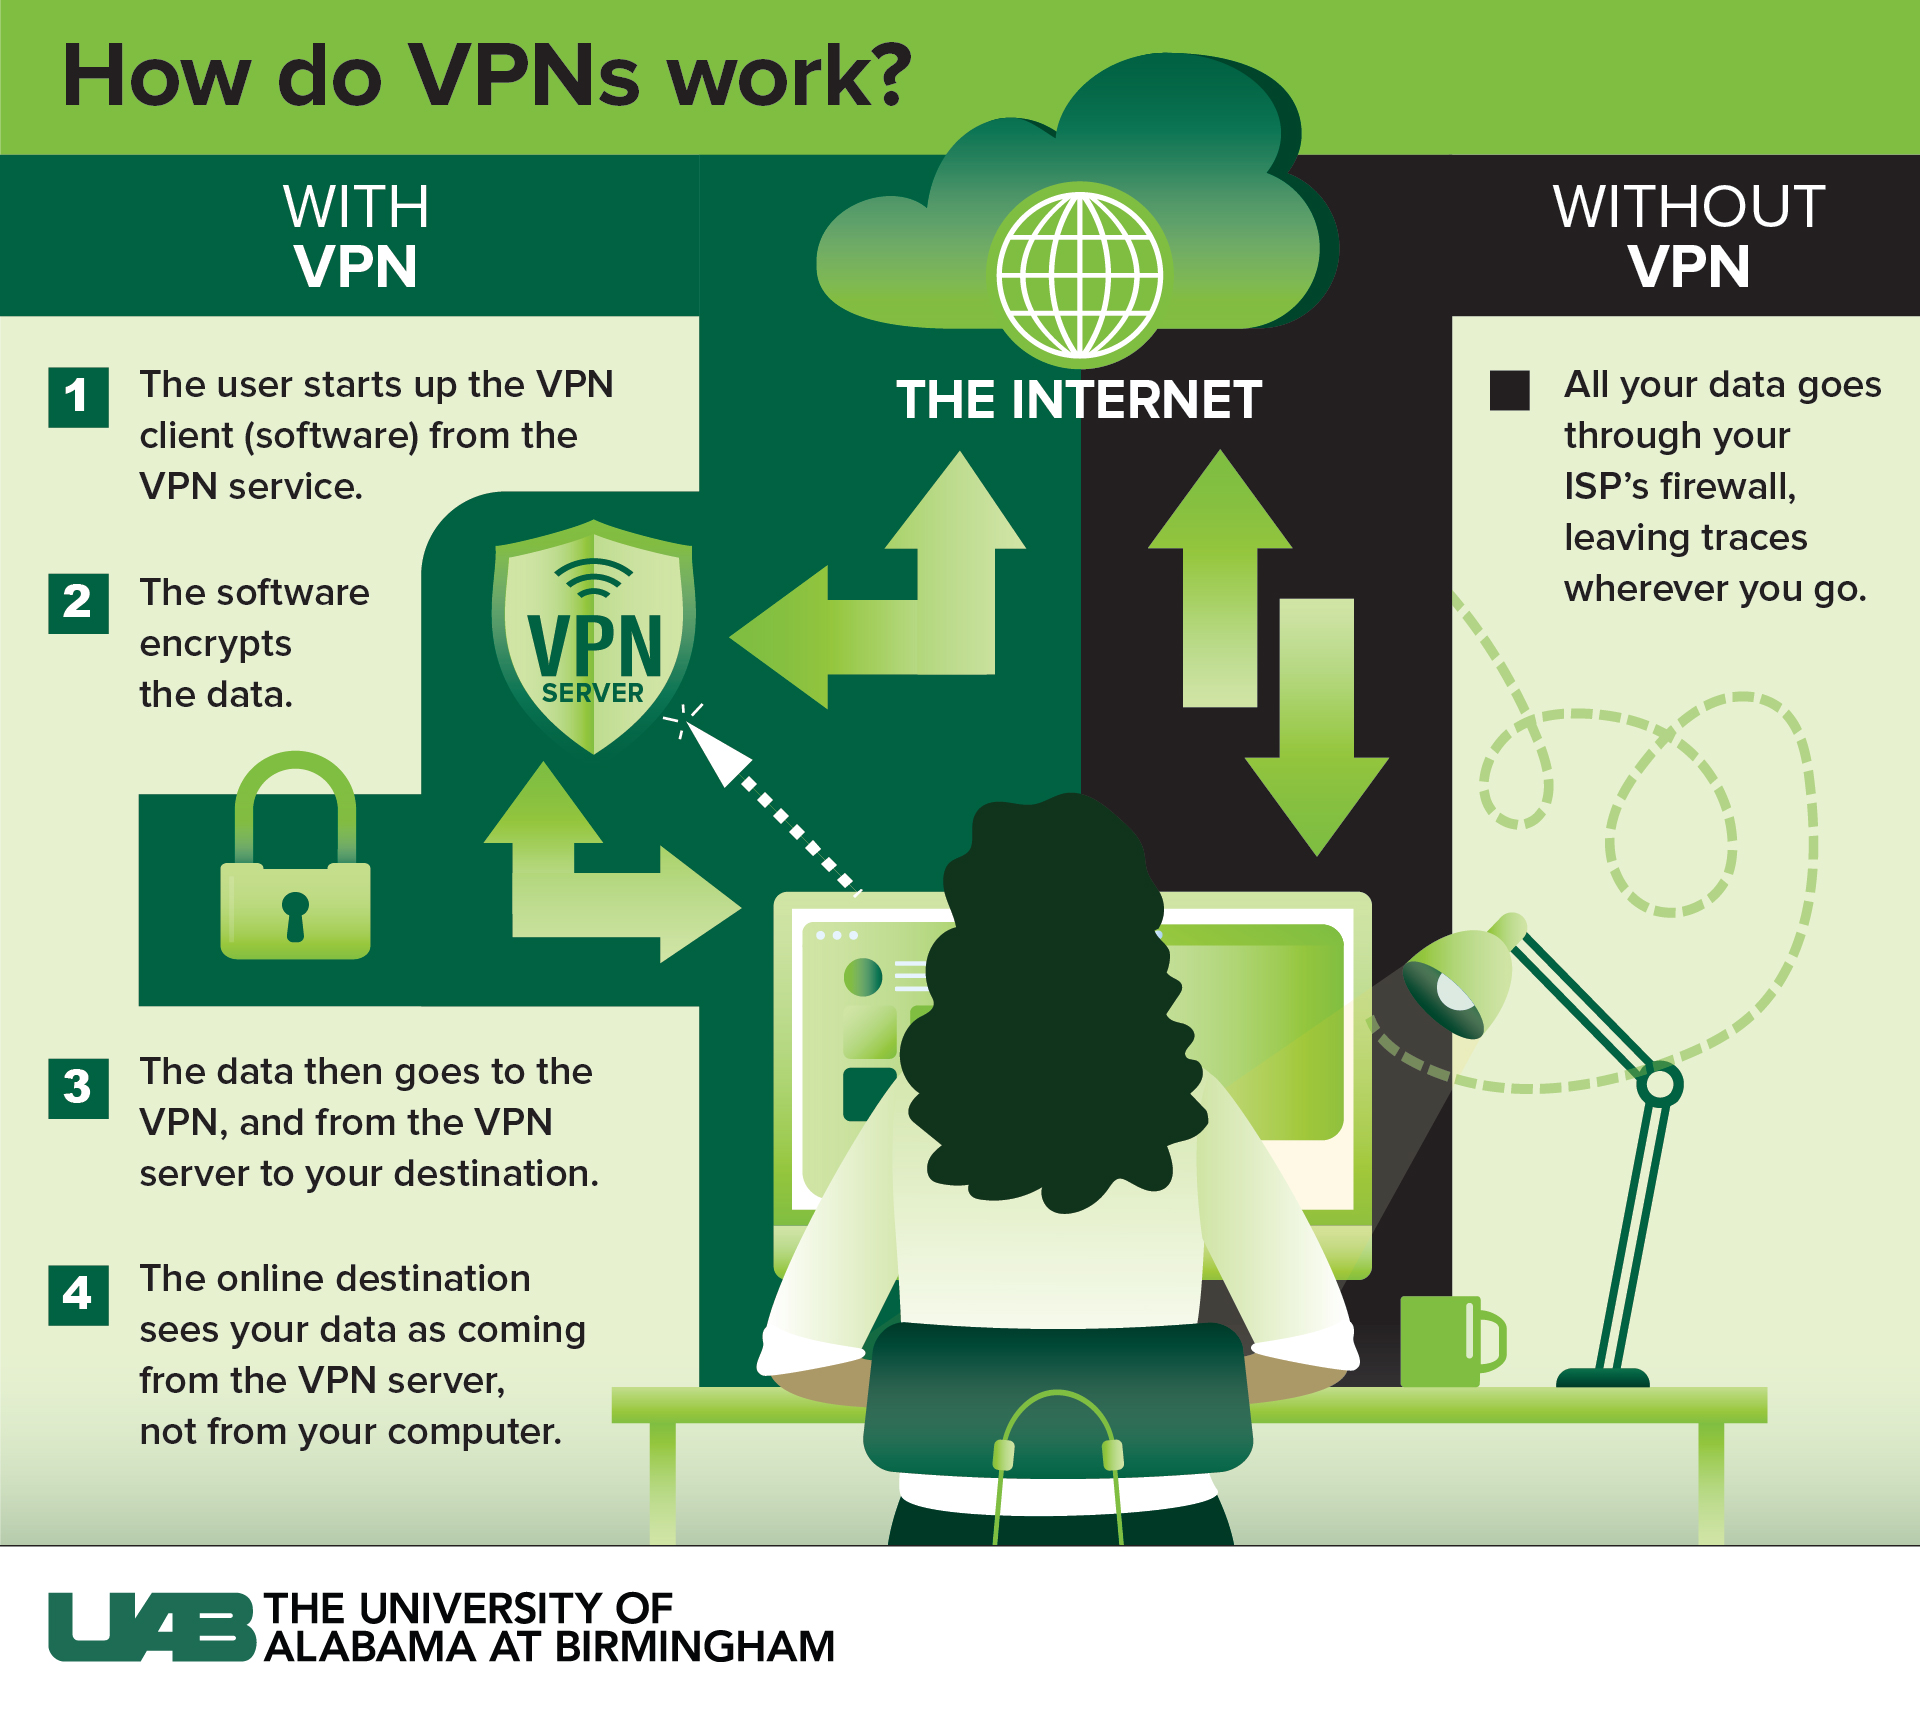 When should you not use a VPN?